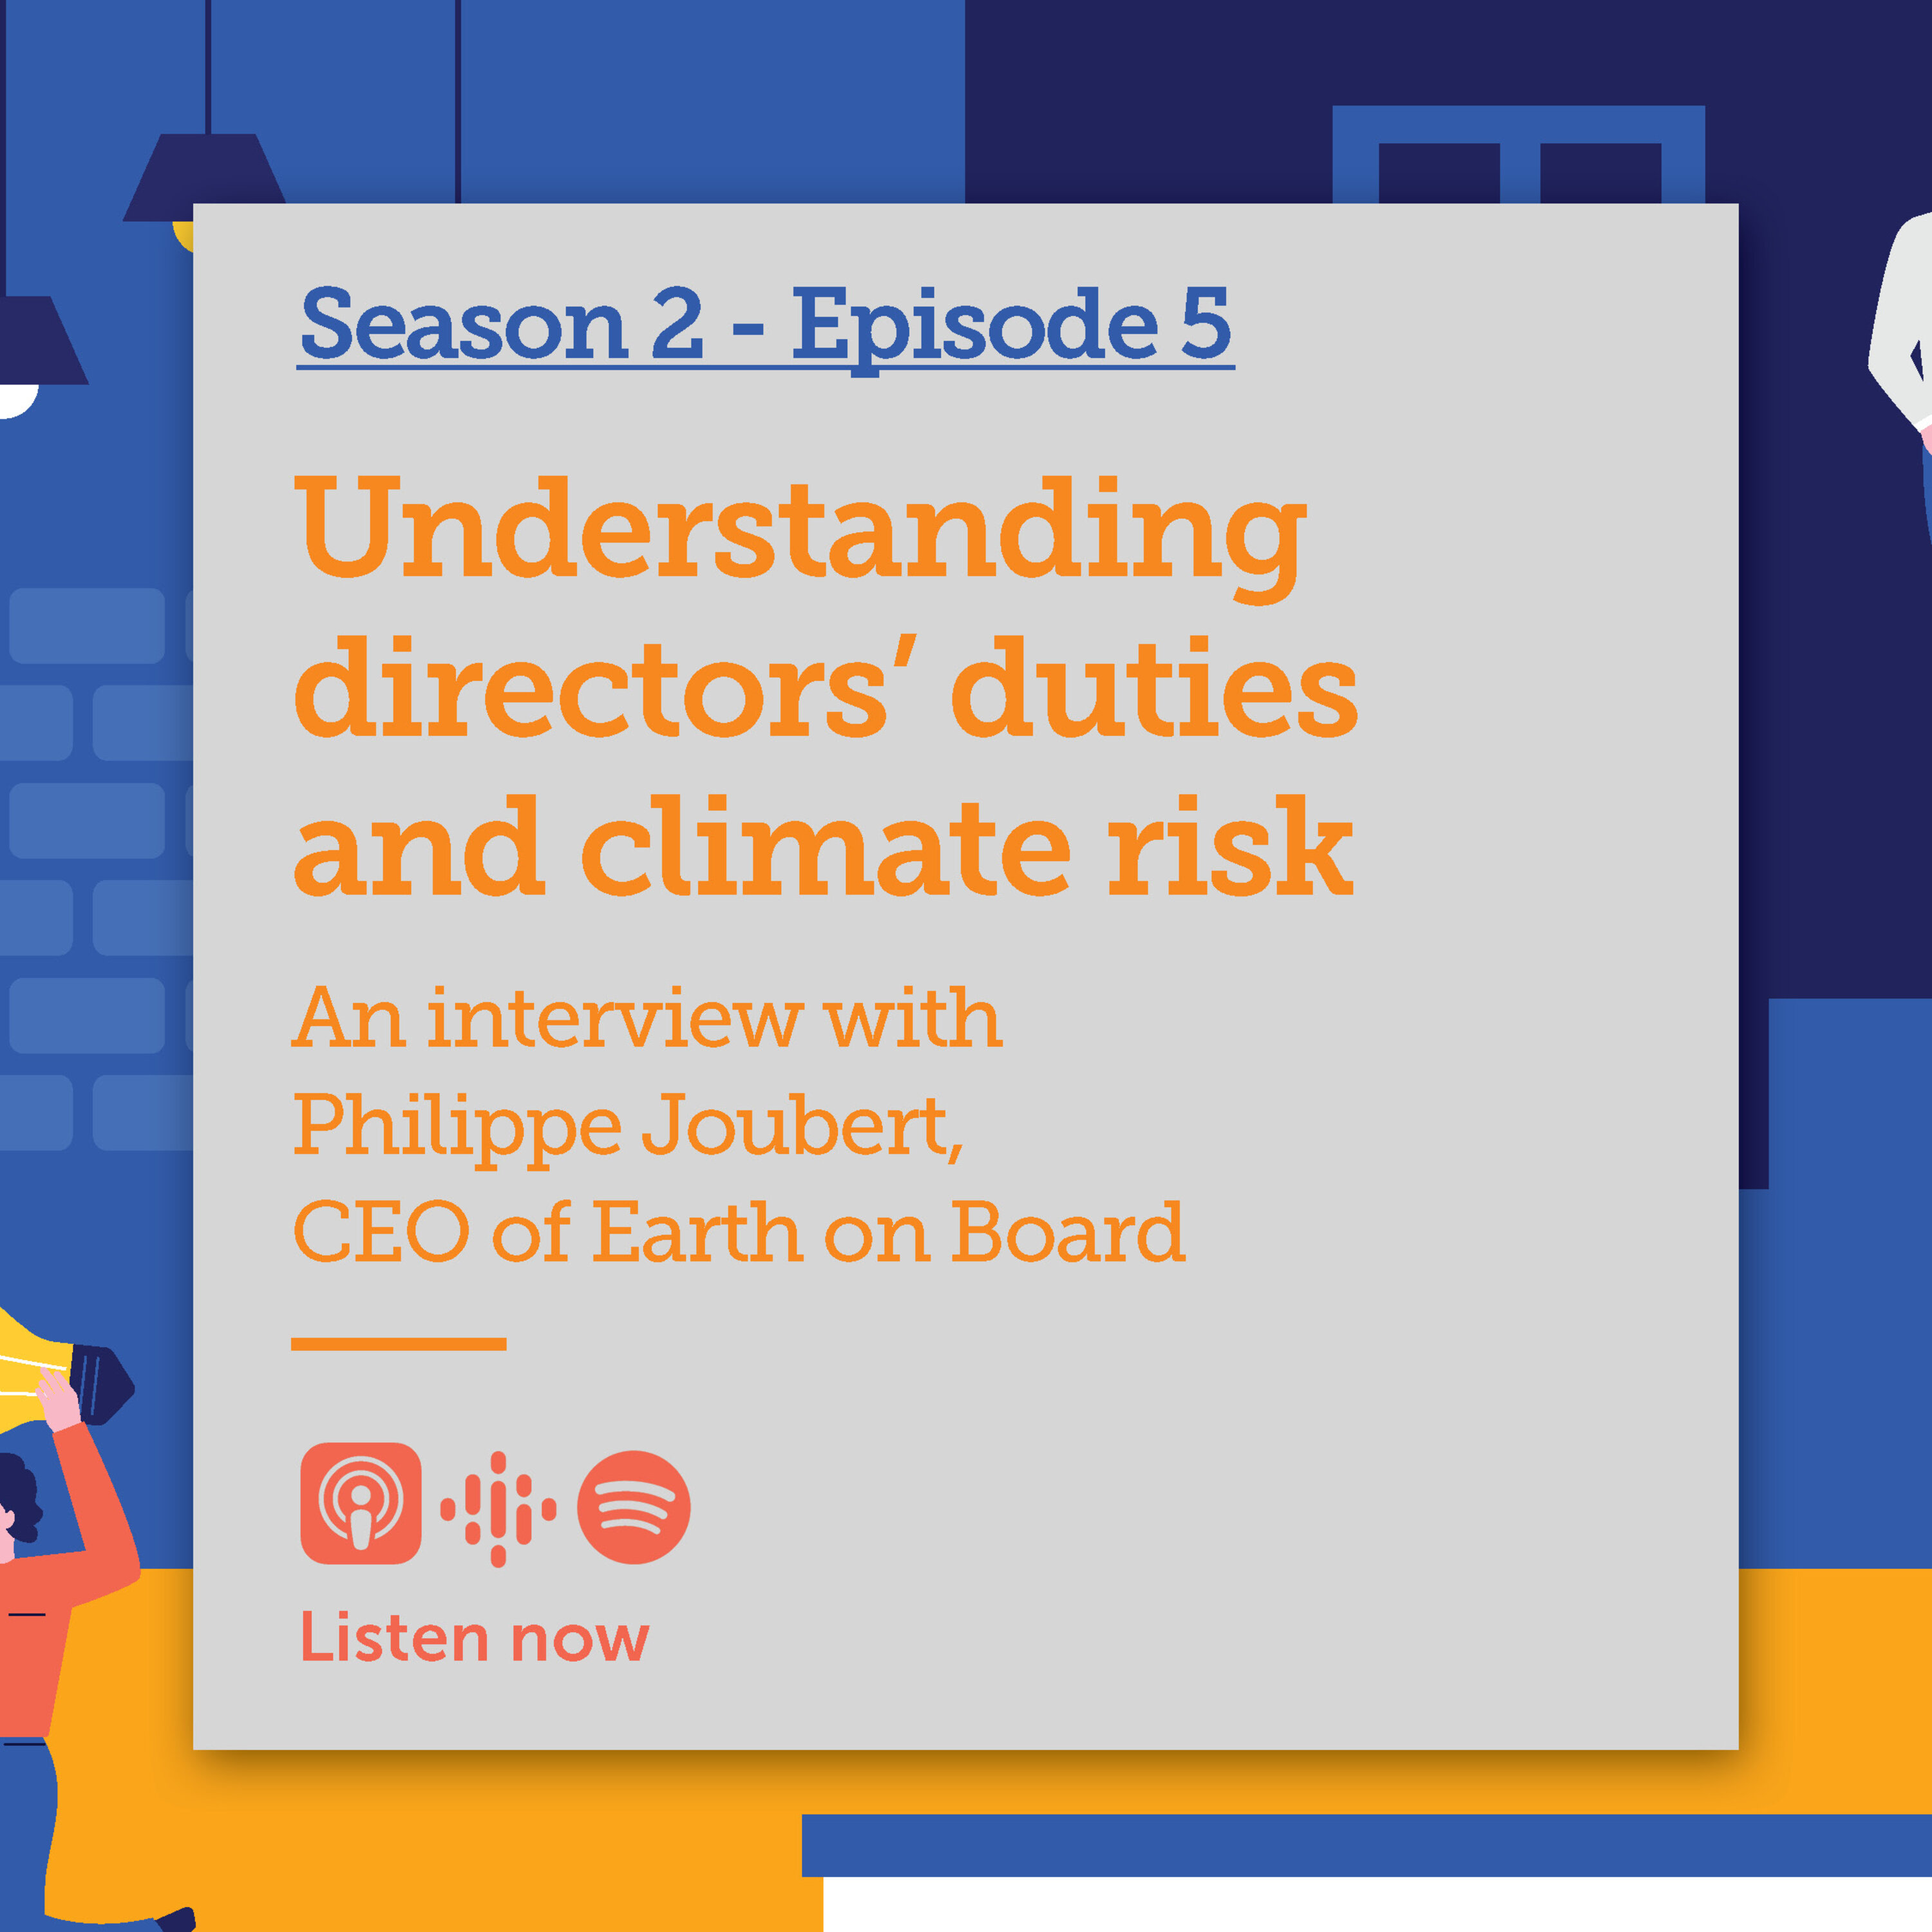 Understanding directors’ duties and climate risk: An interview with Philippe Joubert, CEO of Earth on Board